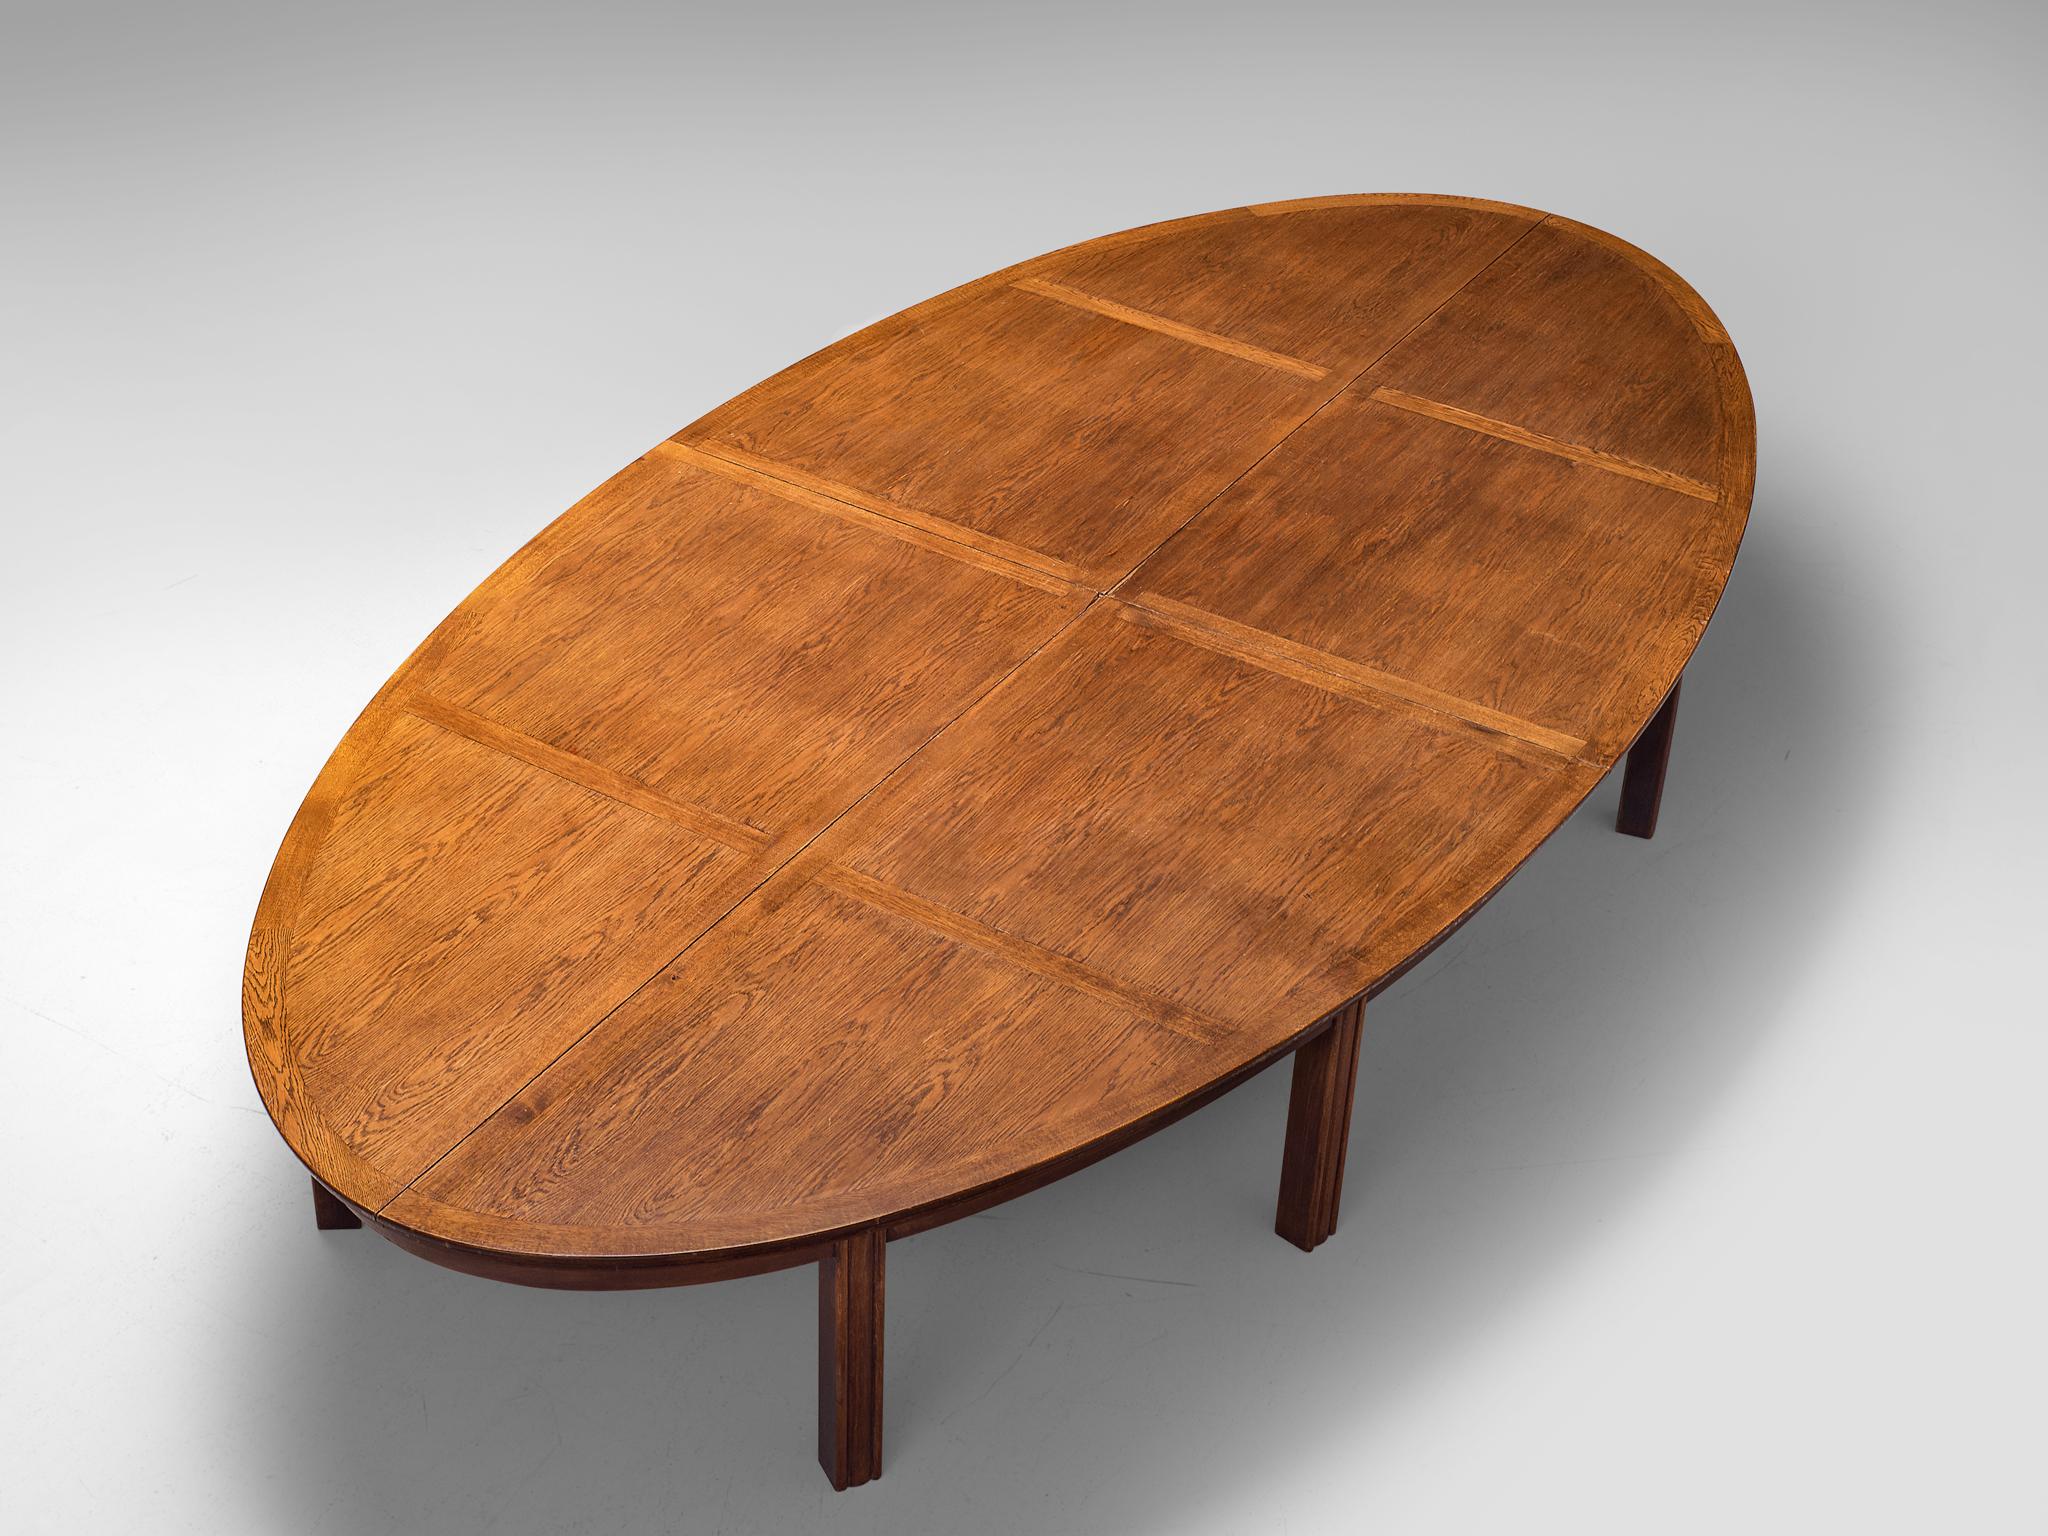 Conference or dining table, oak, the Netherlands, 1950s

Beautiful aged large conference or dining table manufactured in the Netherlands in the 1950s. The wonderfully oval-shaped tabletop is inlayed with oak wood. A grid is created that structures